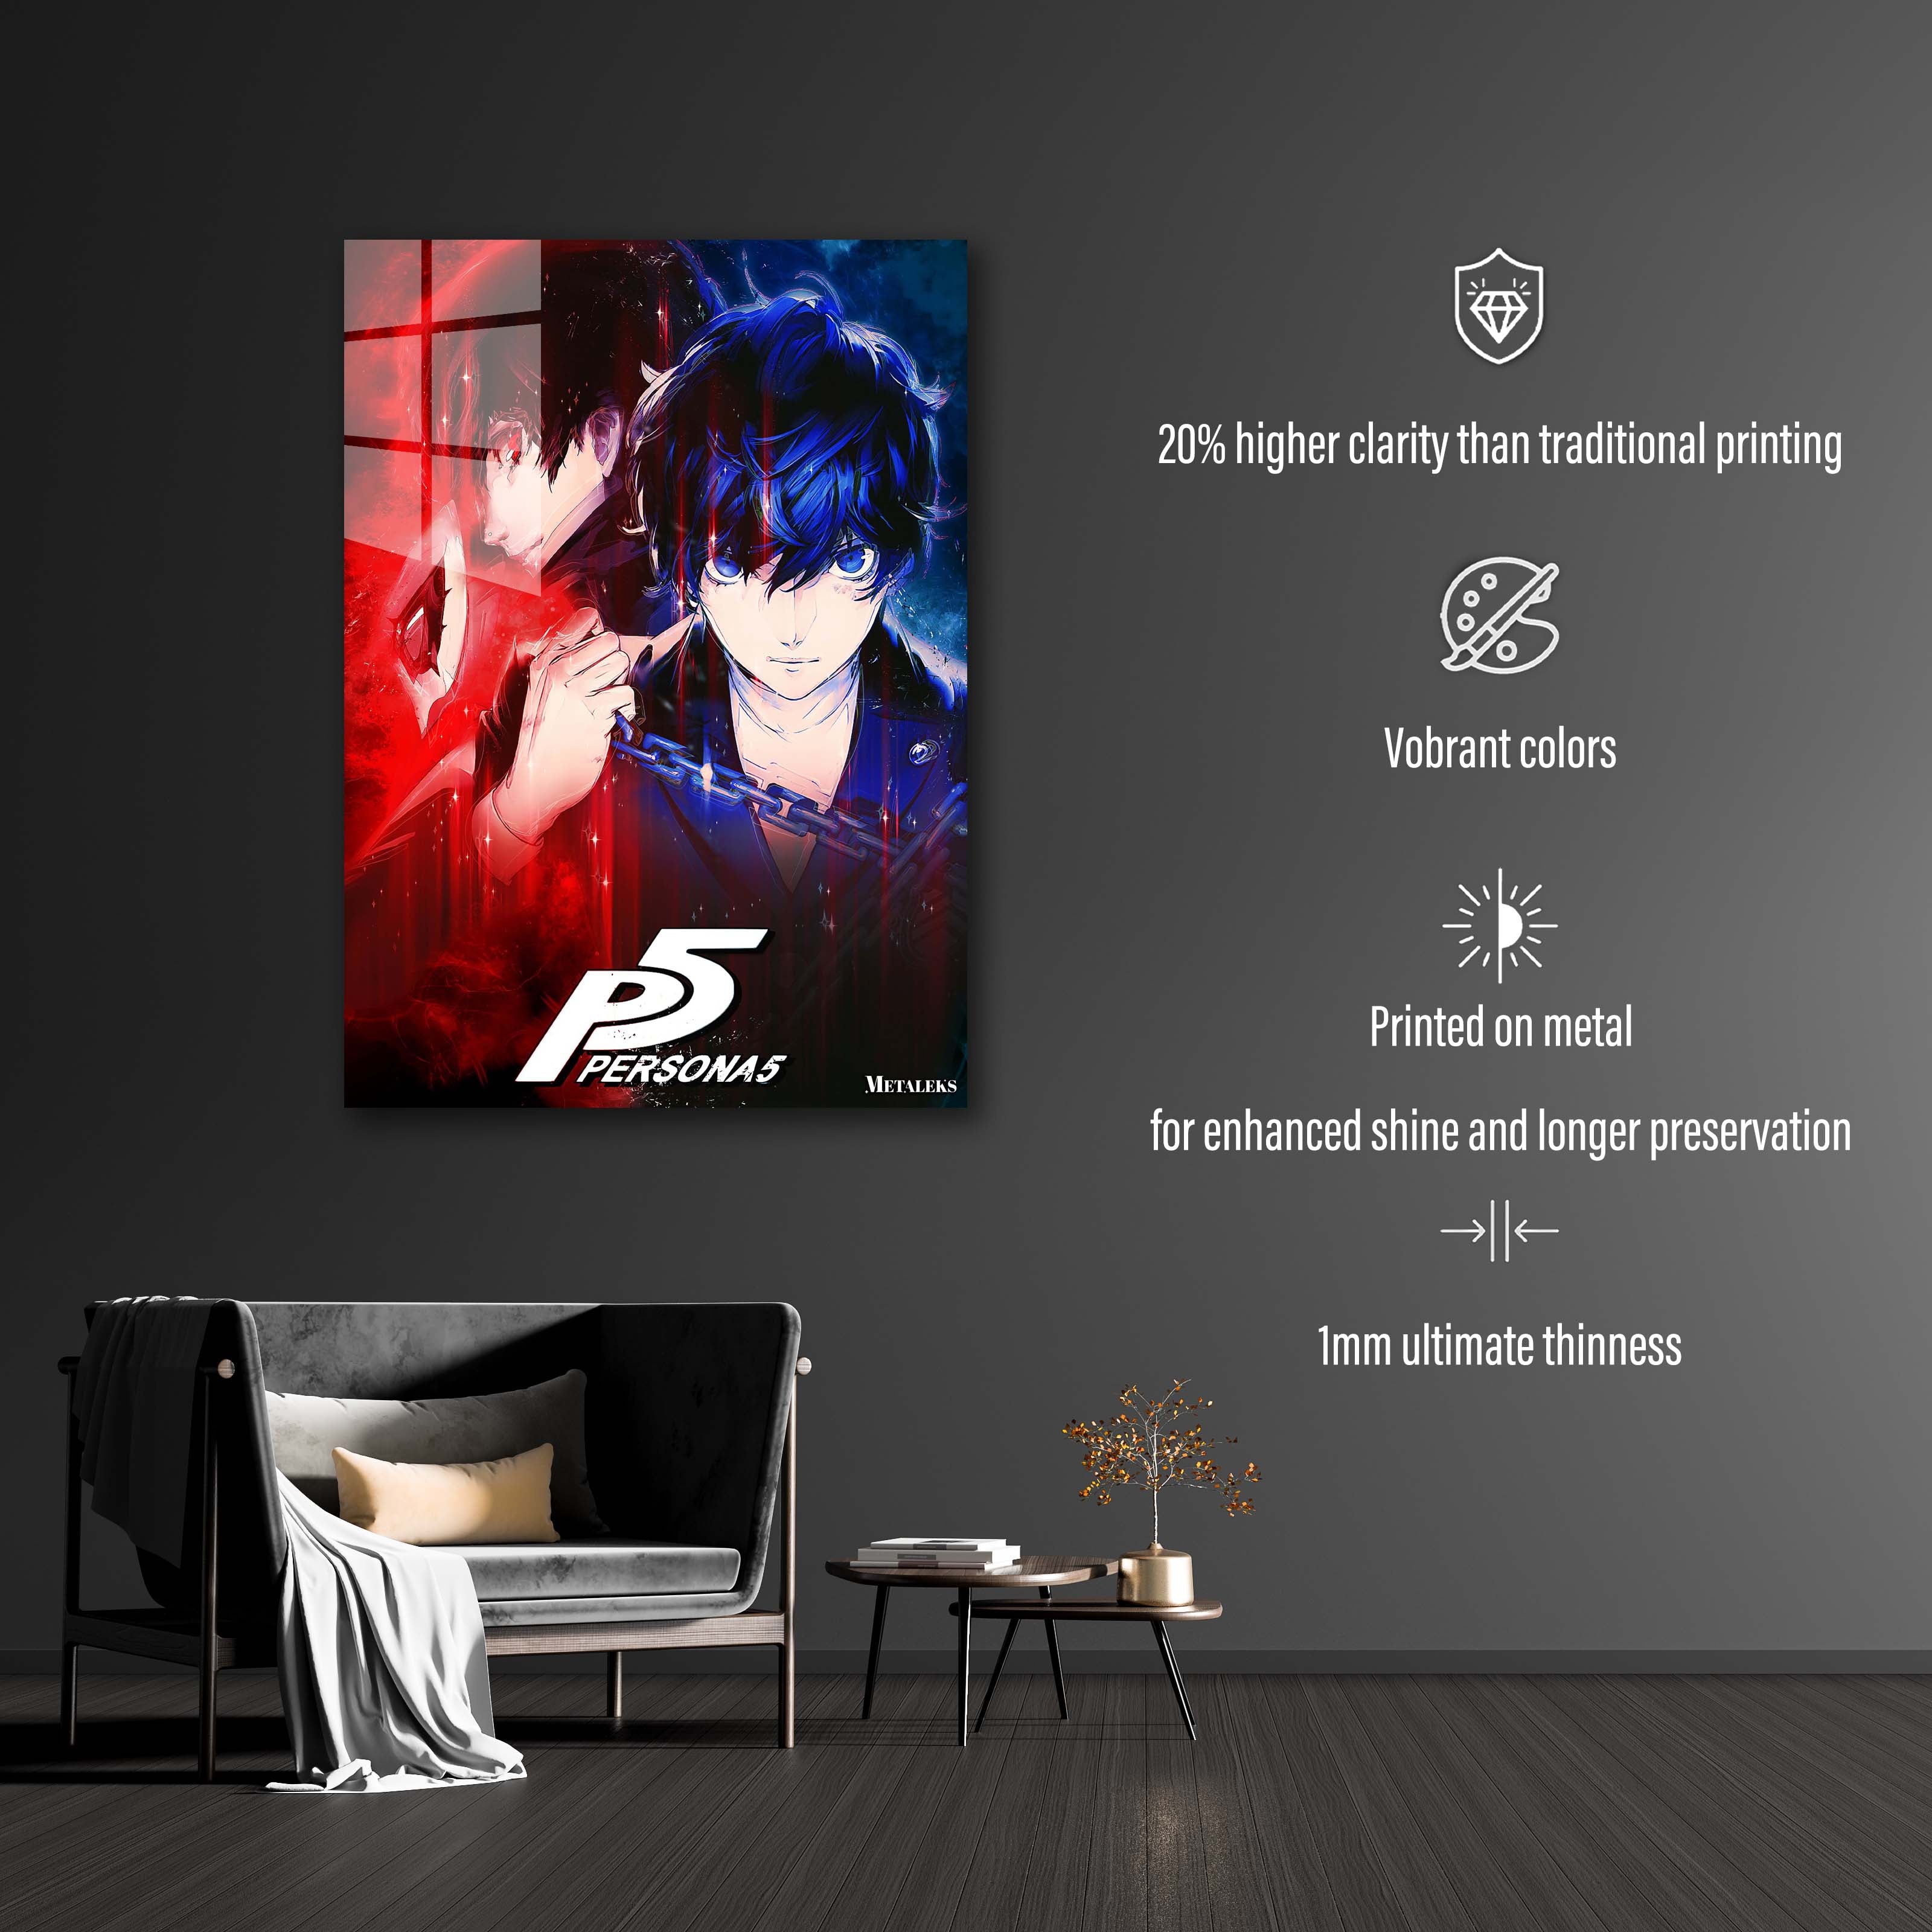 Persona 5 Abstract-designed by @Goldfingers